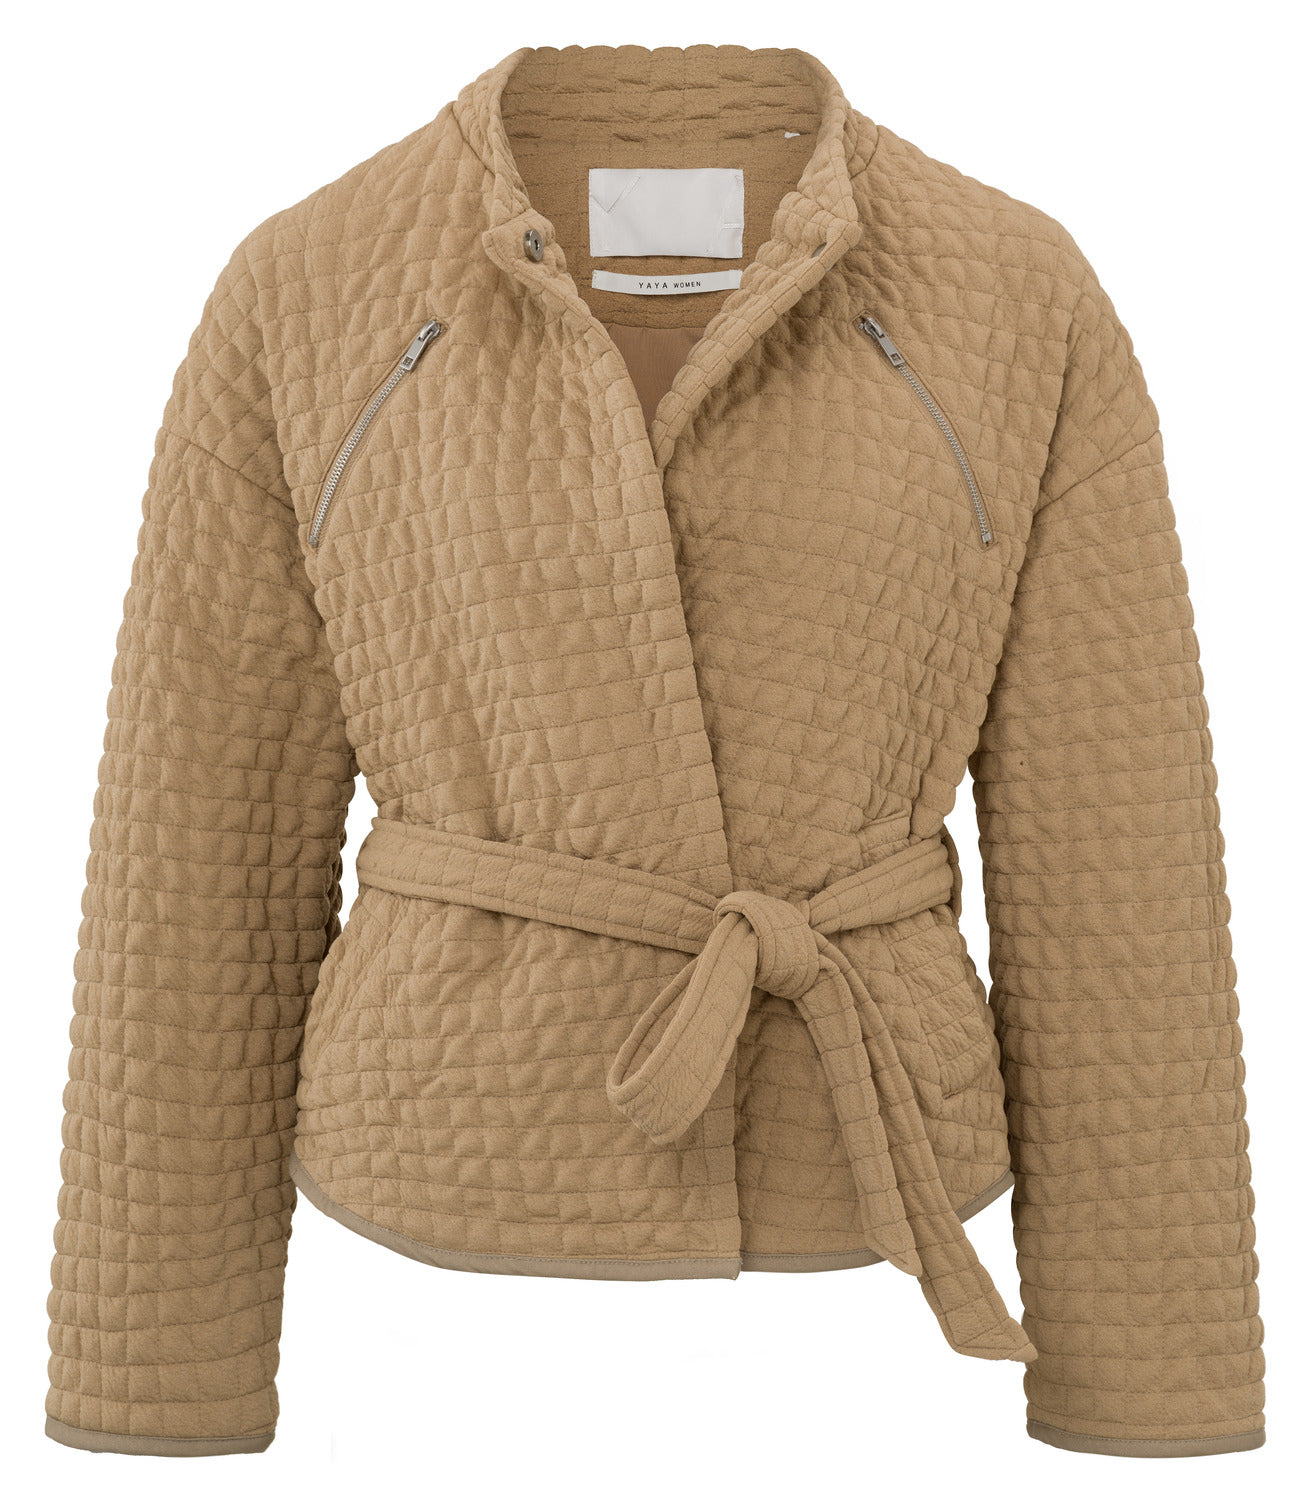 Woven quilted jacket with zippers YAYA